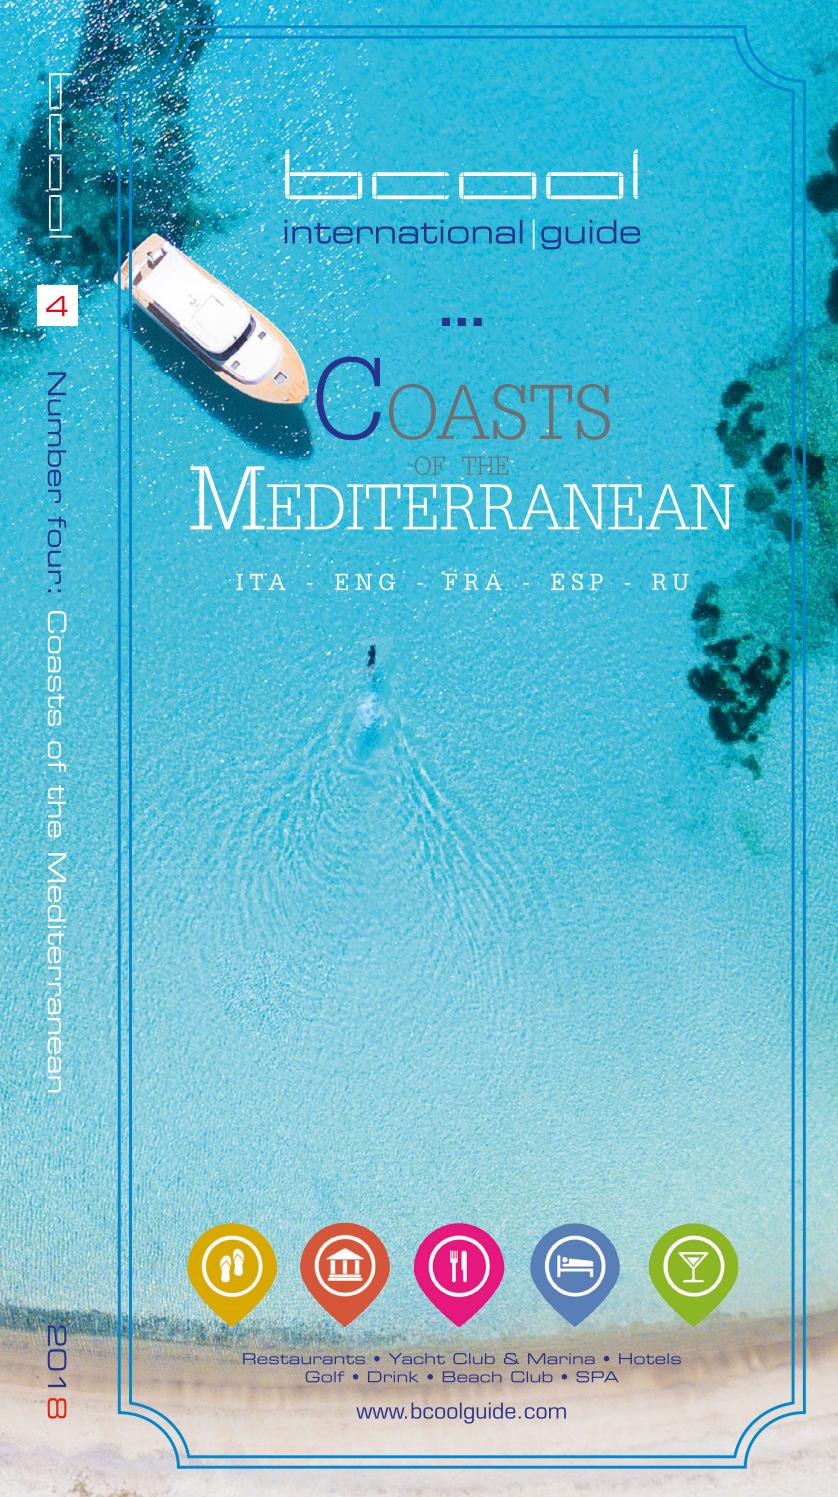 Mobilier De Jardin Carrefour Best Of 2018 Bcool Guide "coasts Of the Mediterrean" by Bcool City